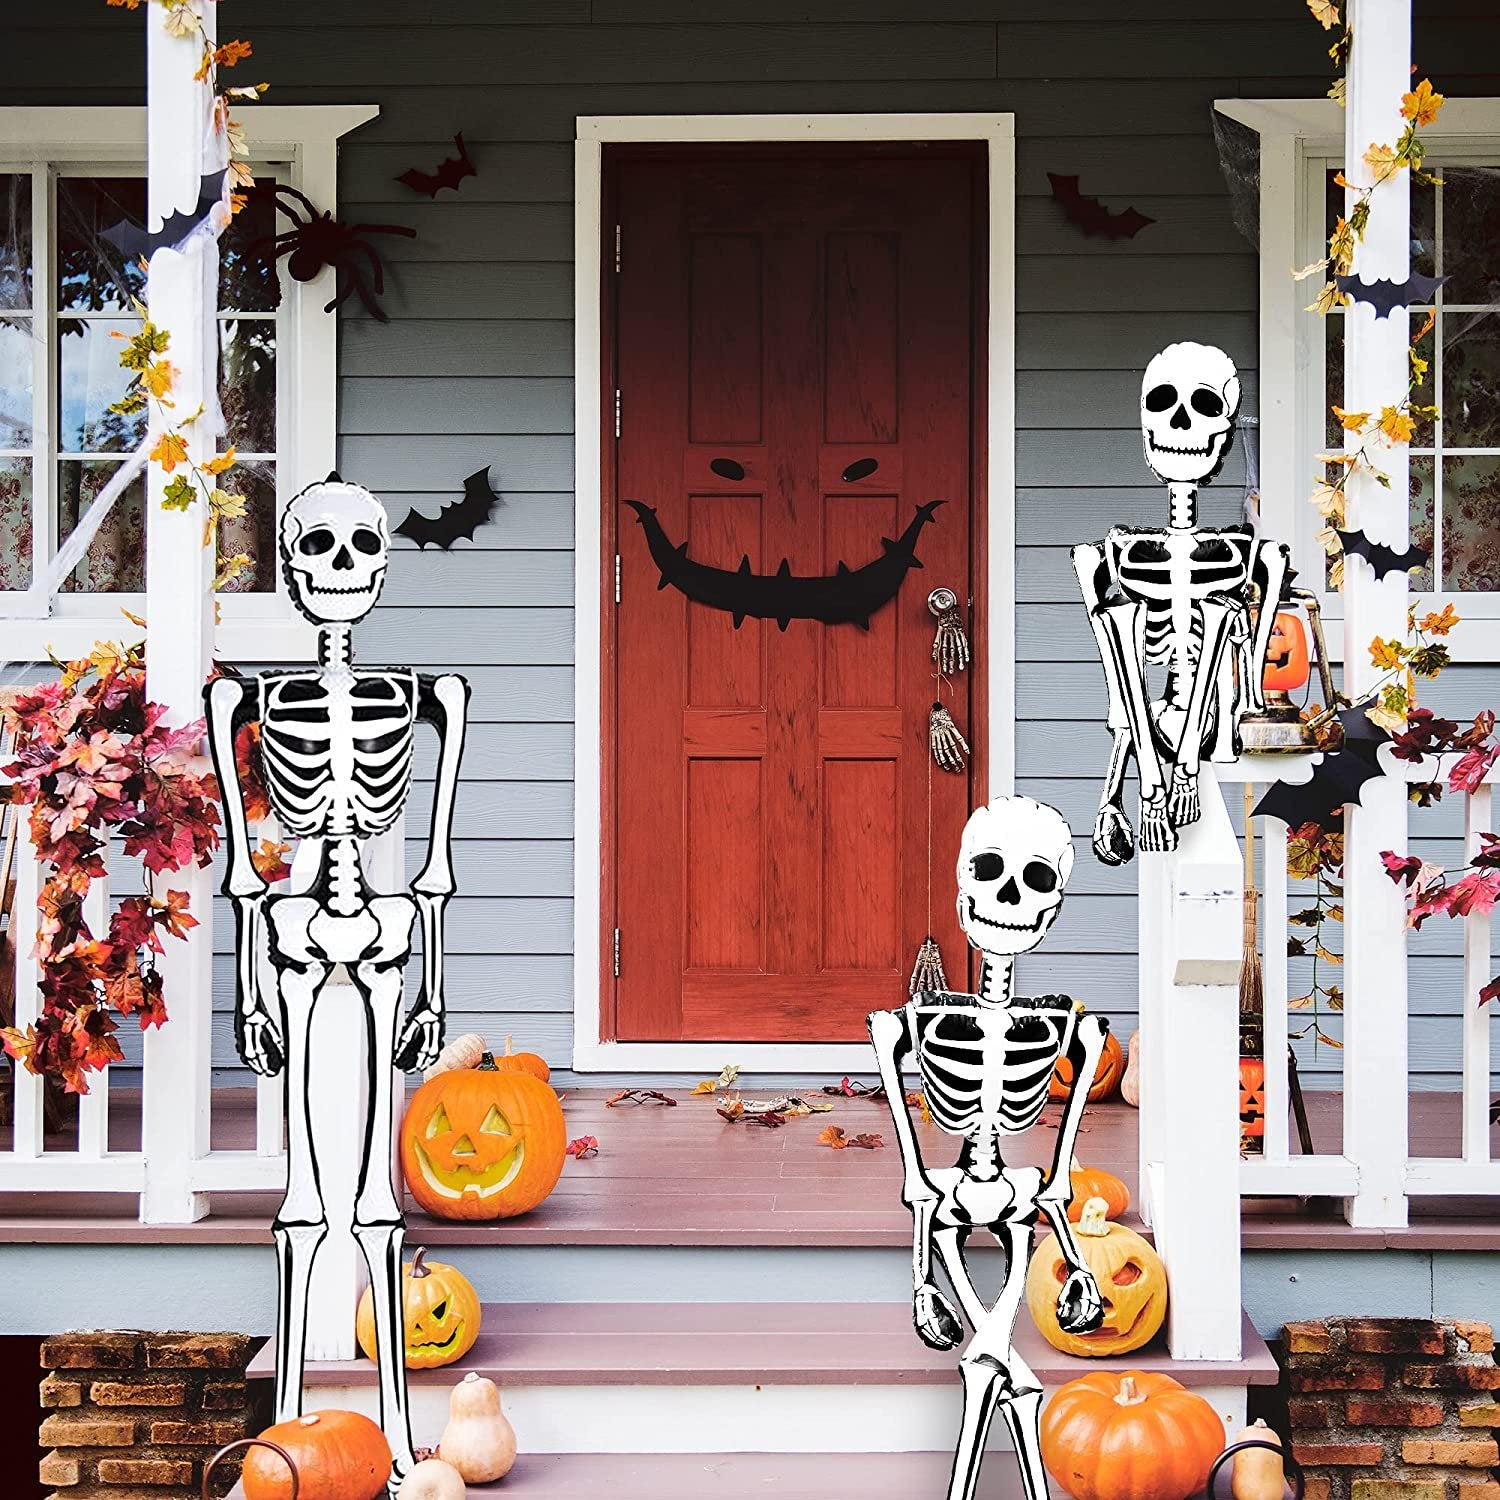 Halloween Skeleton Inflate Decoration - 6ft Tall - Cute and Creepy Home Decor - for Indoor and Outdoor Use - Halloween Party Supplies, Contest Prize for Kids